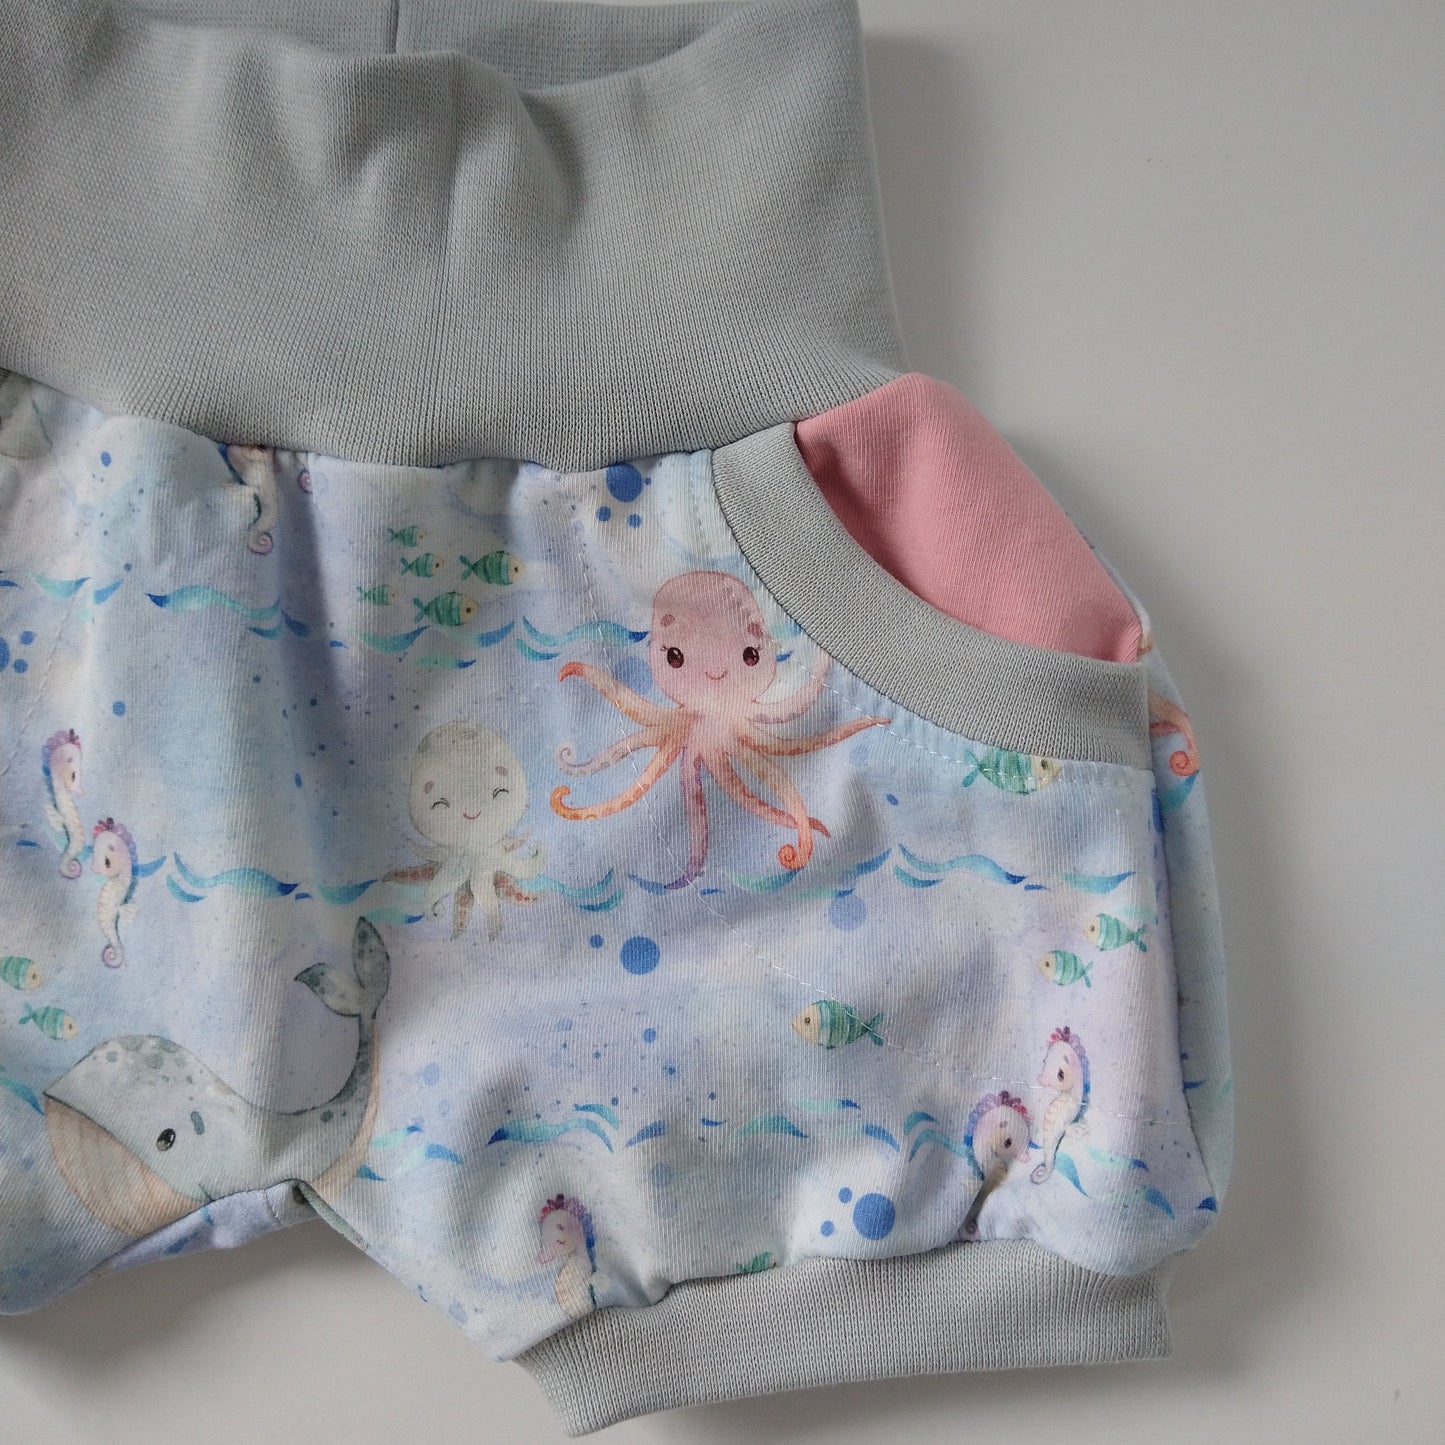 Baby summer shorts, size EUR 68 cm / US 4-6 months, ocean life mix and match (Handmade in Canada)